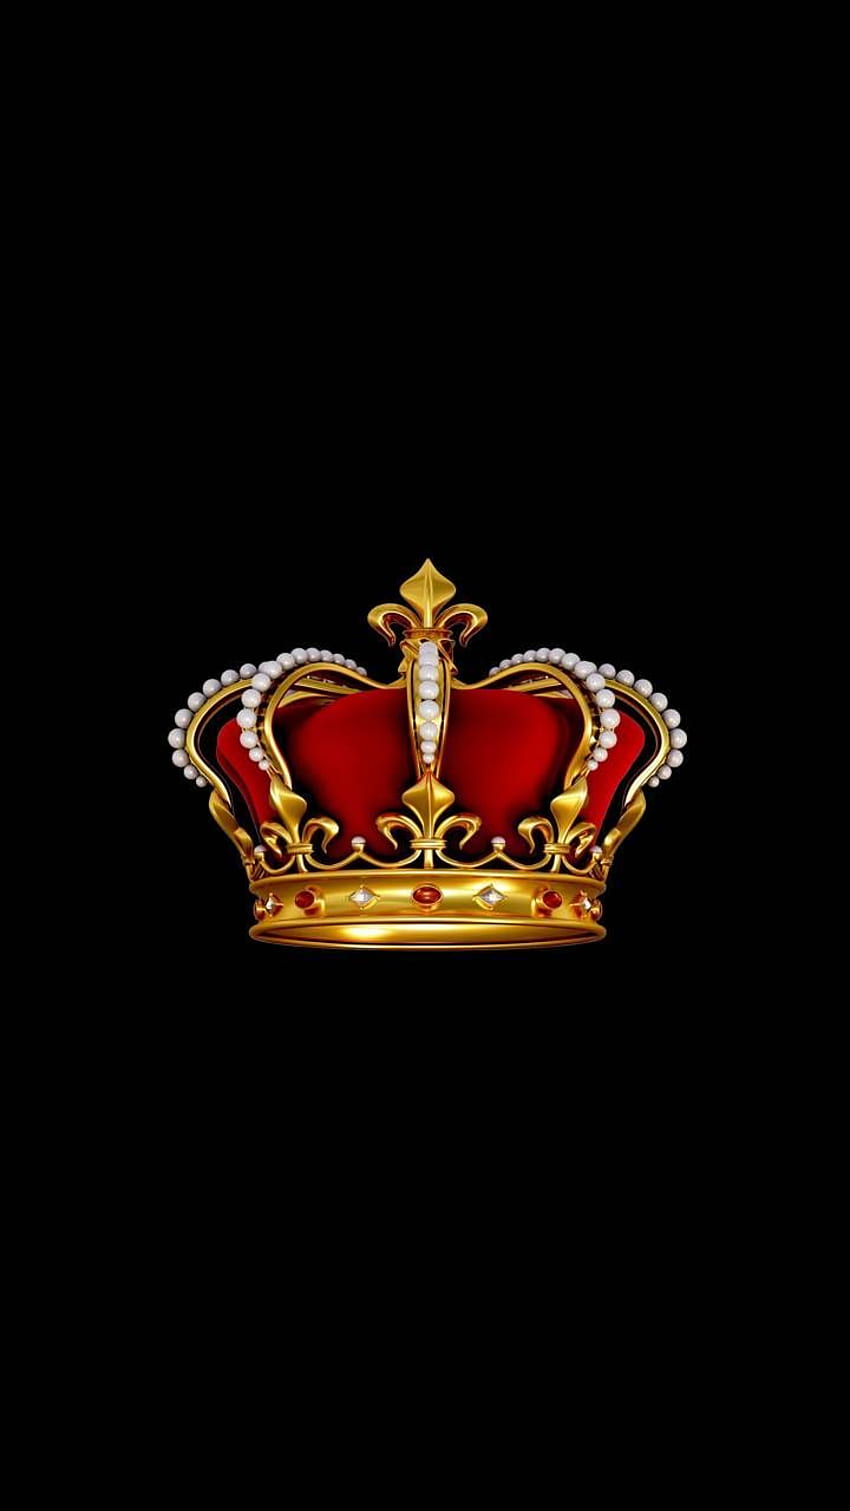 Best KING TATTOO with CROWN / How to make Crown Tattoo / King Tattoo / Step  by step Tattoo design - YouTube